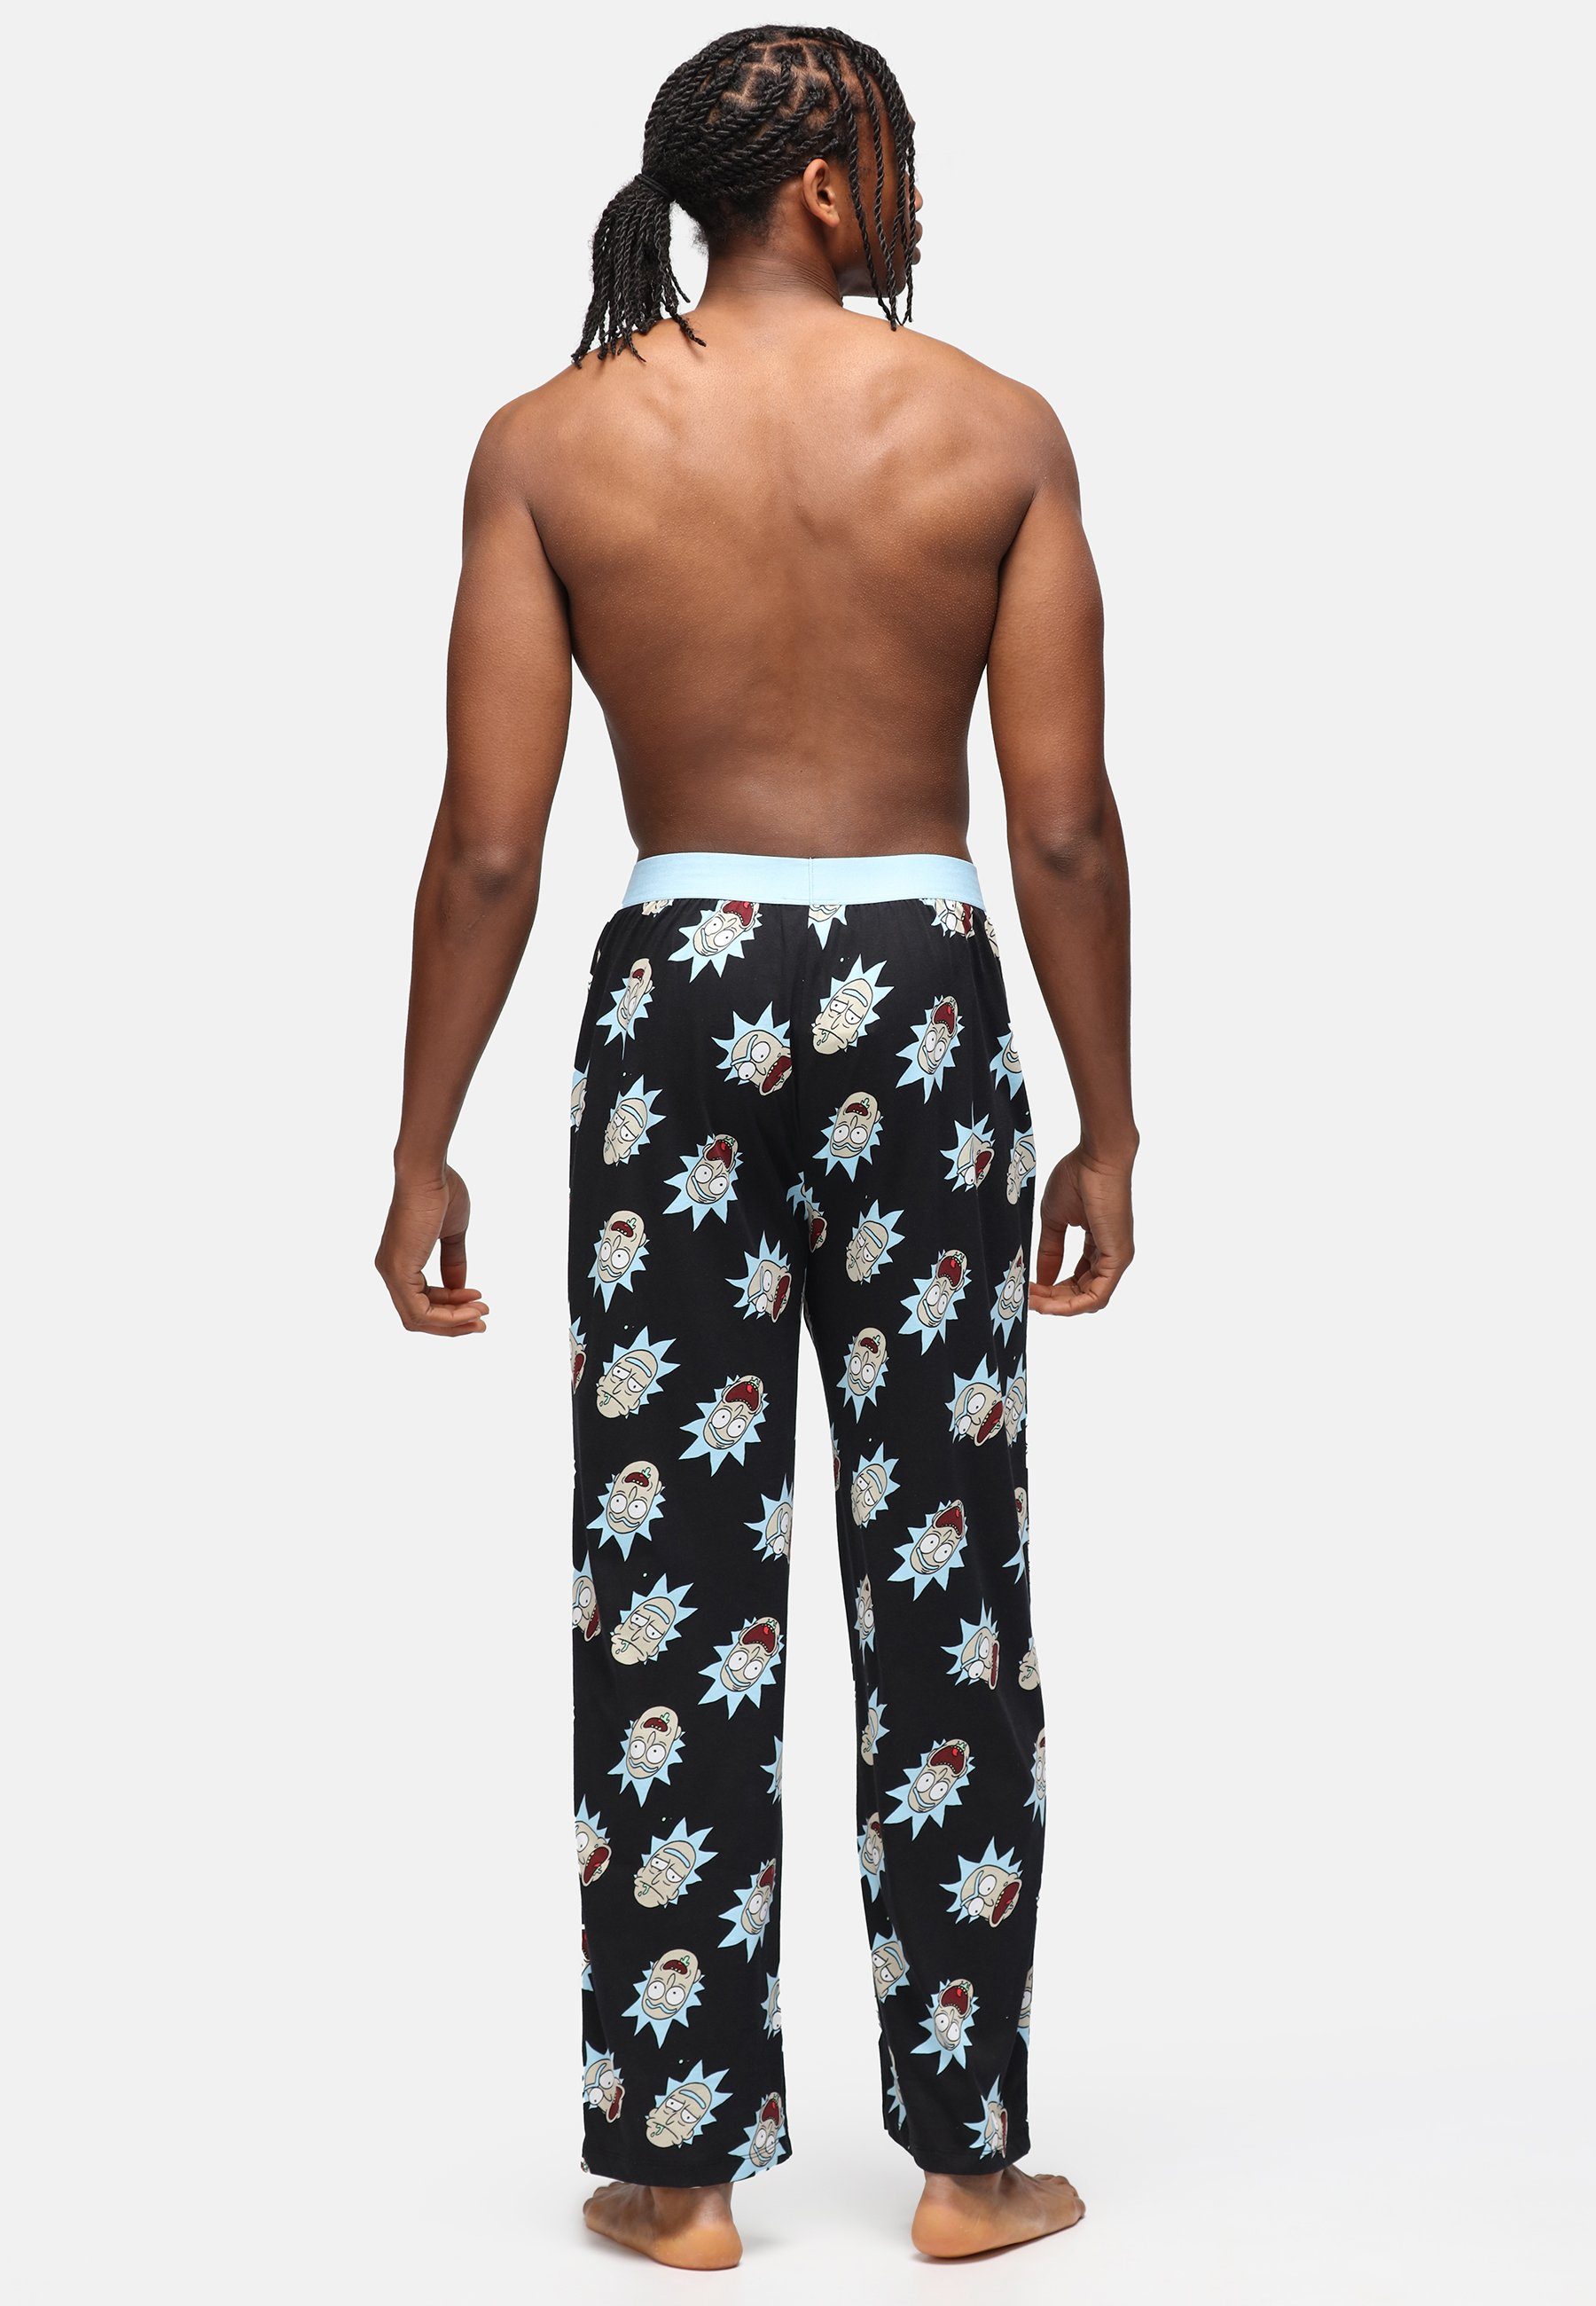 Morty Recovered Pant Lounge - - over print Rick and Loungepants all Faces Black